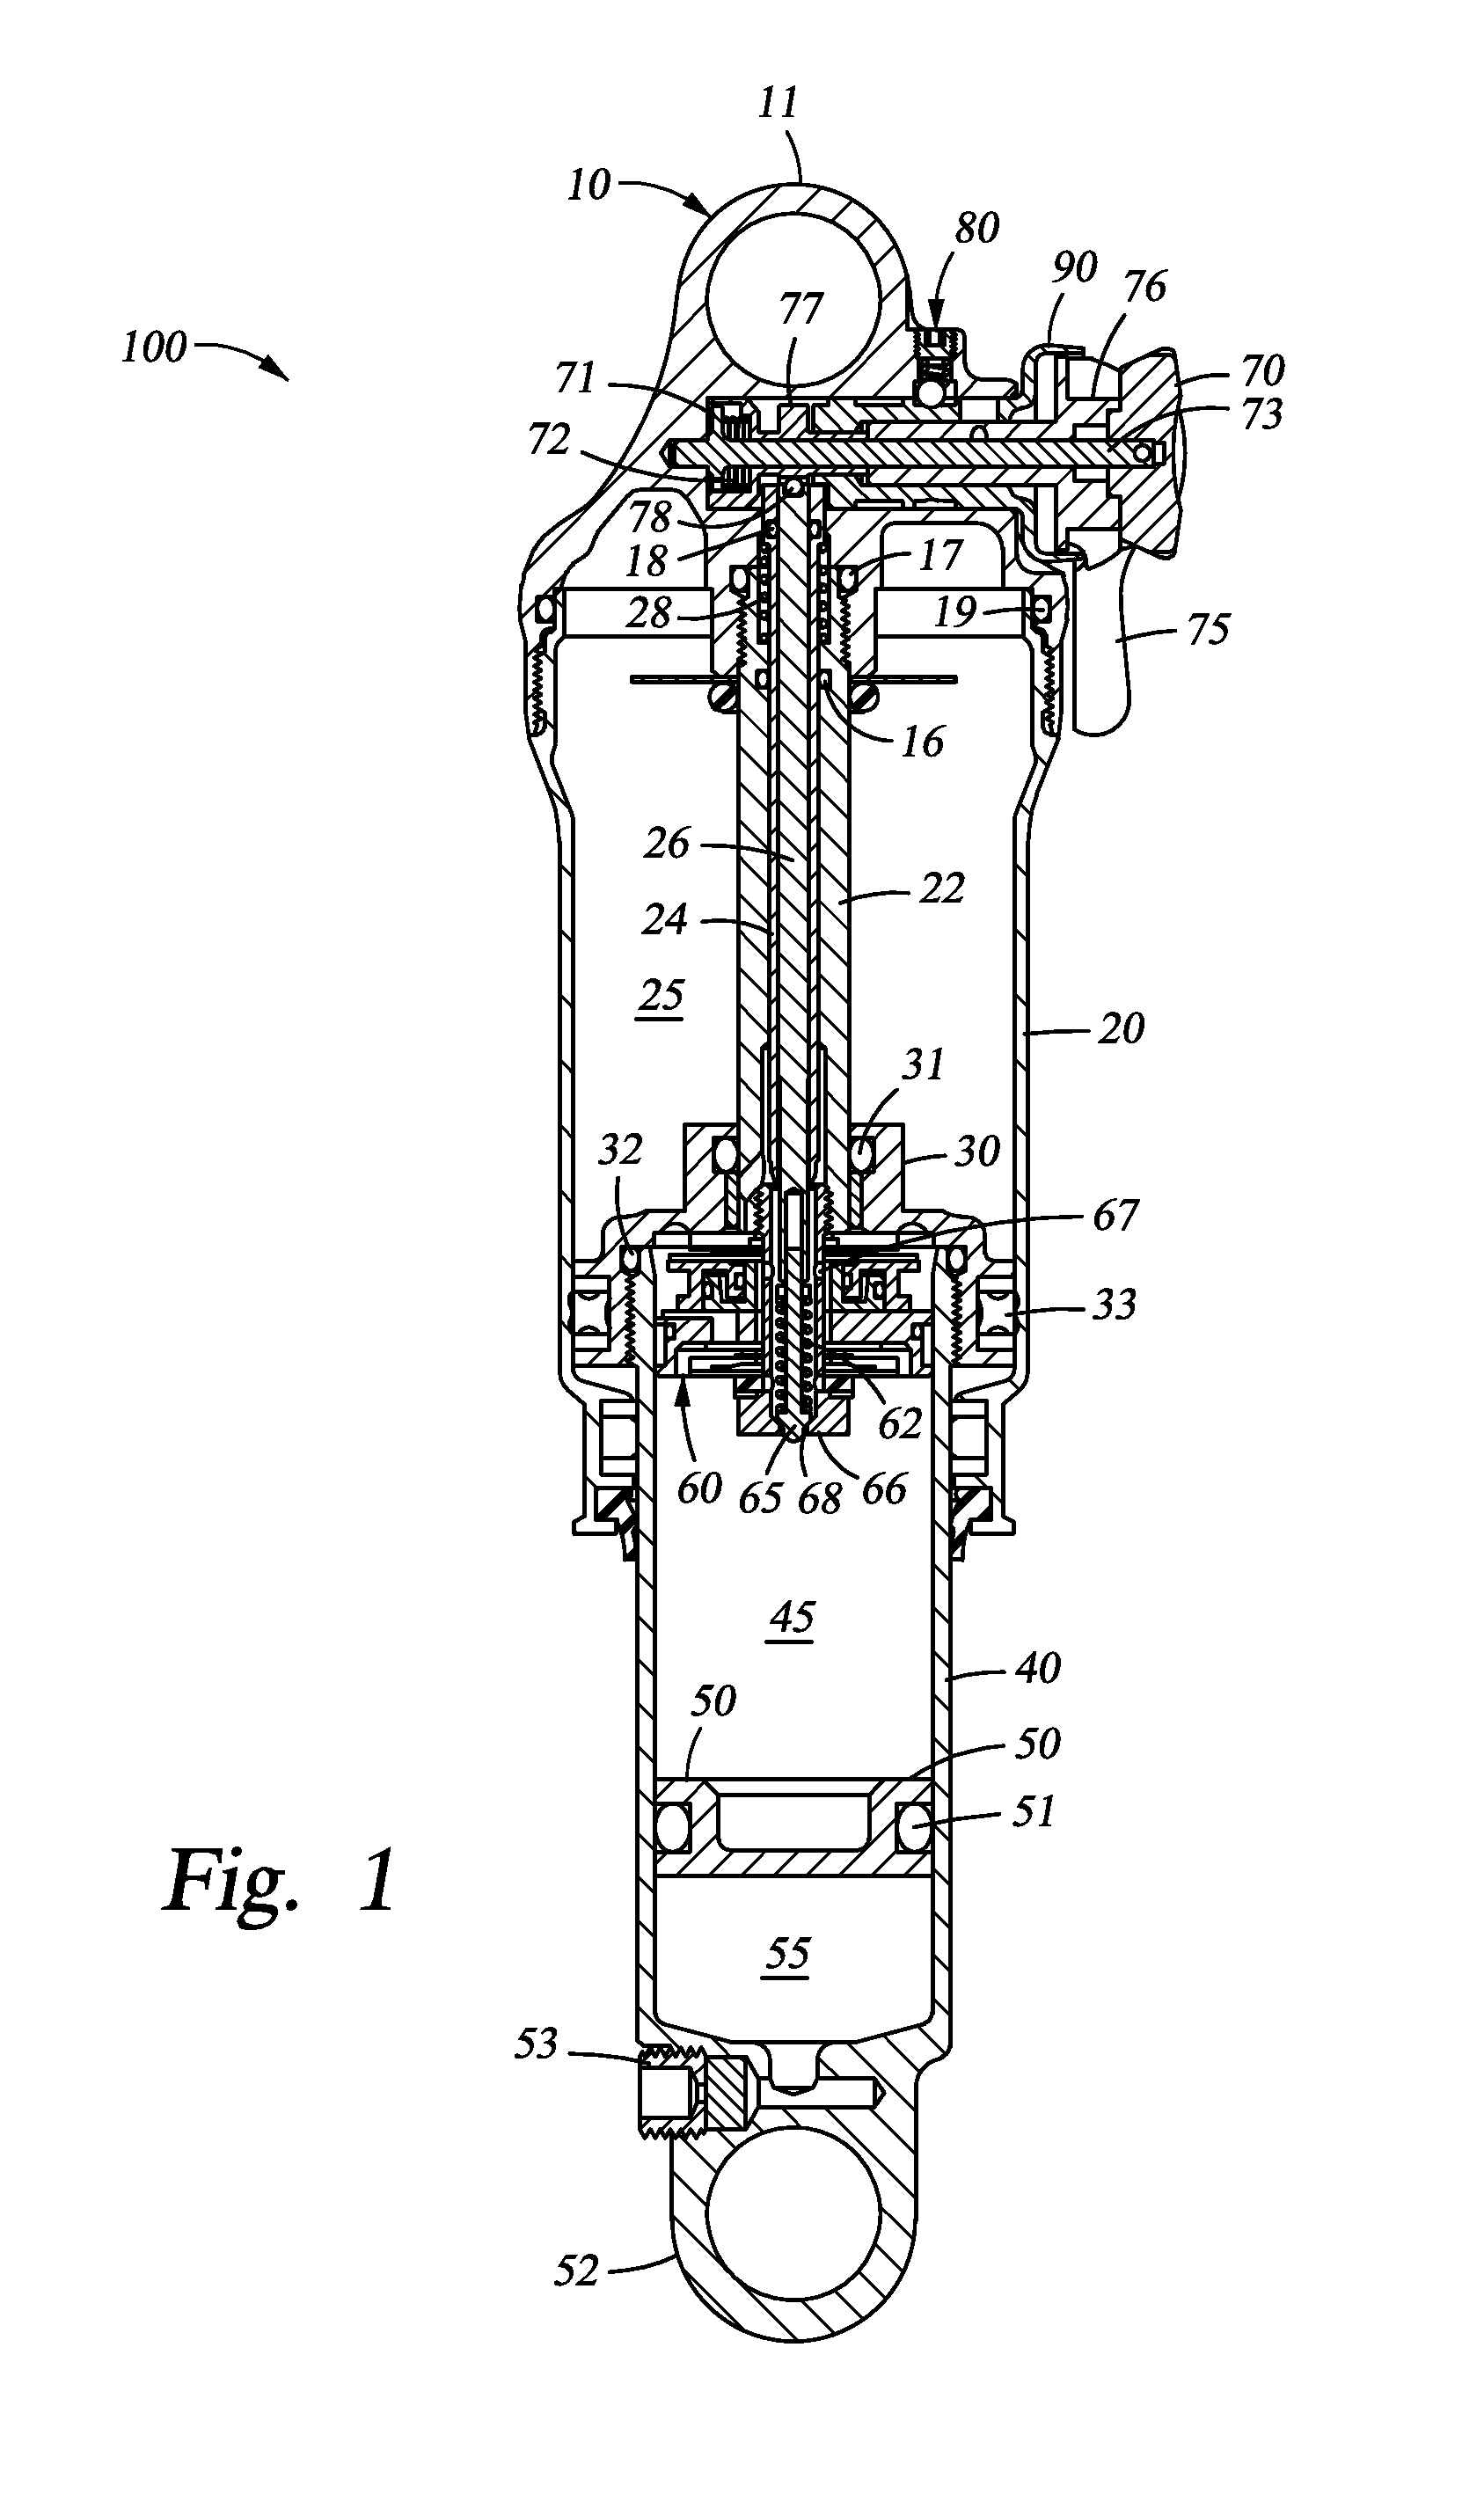 Methods and apparatus for variable damping adjuster